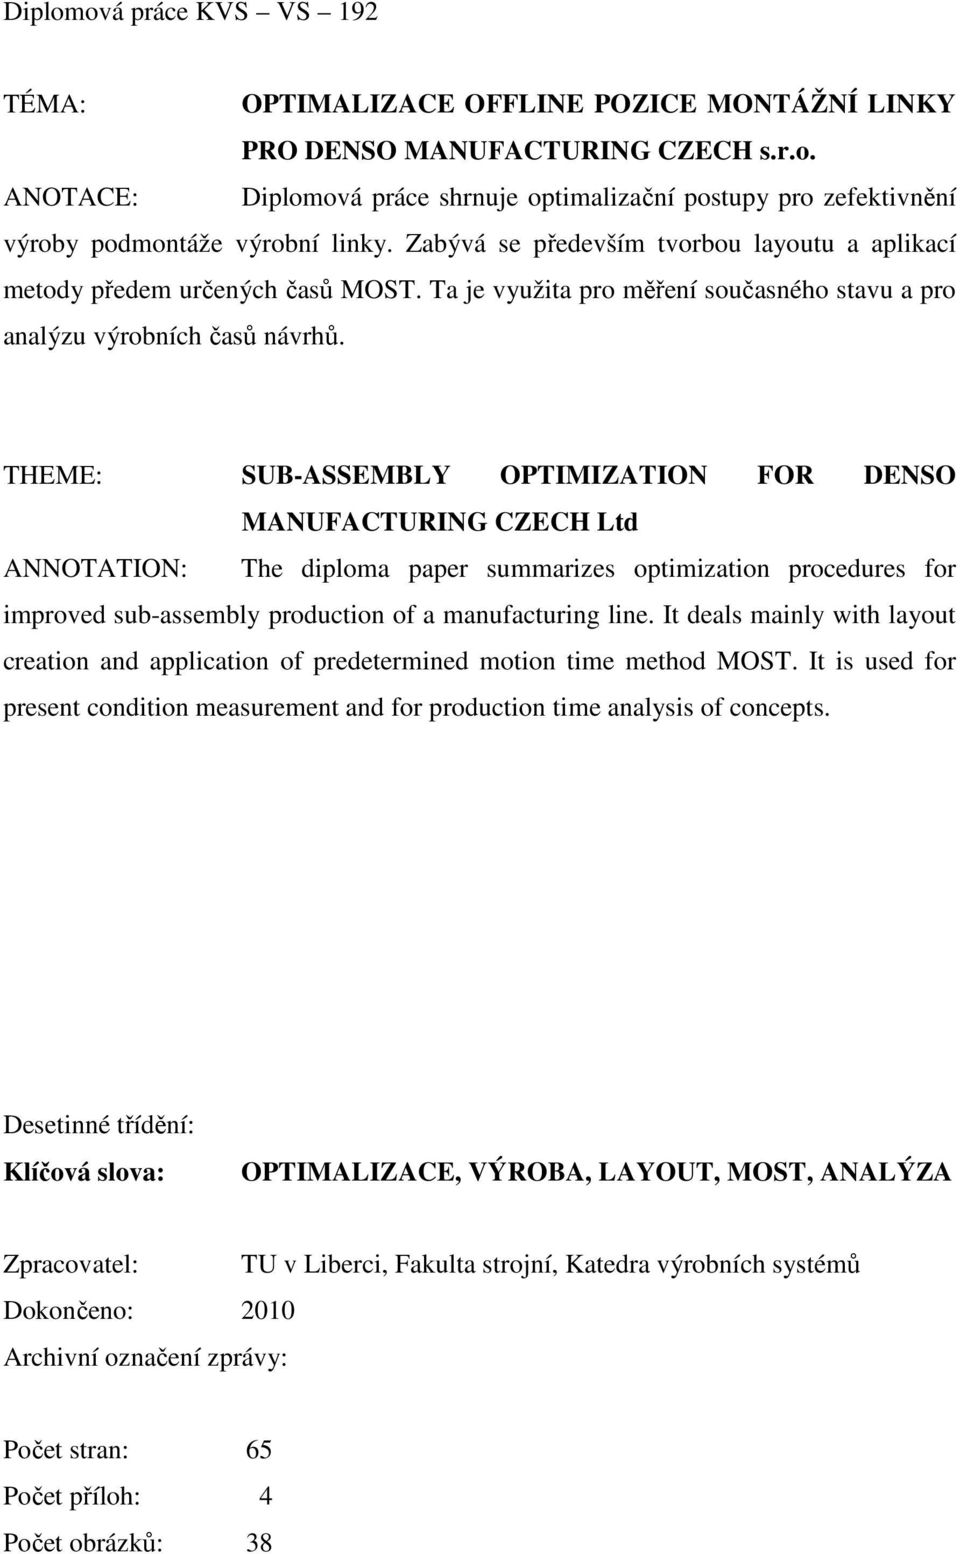 THEME: SUB-ASSEMBLY OPTIMIZATION FOR DENSO MANUFACTURING CZECH Ltd ANNOTATION: The diploma paper summarizes optimization procedures for improved sub-assembly production of a manufacturing line.